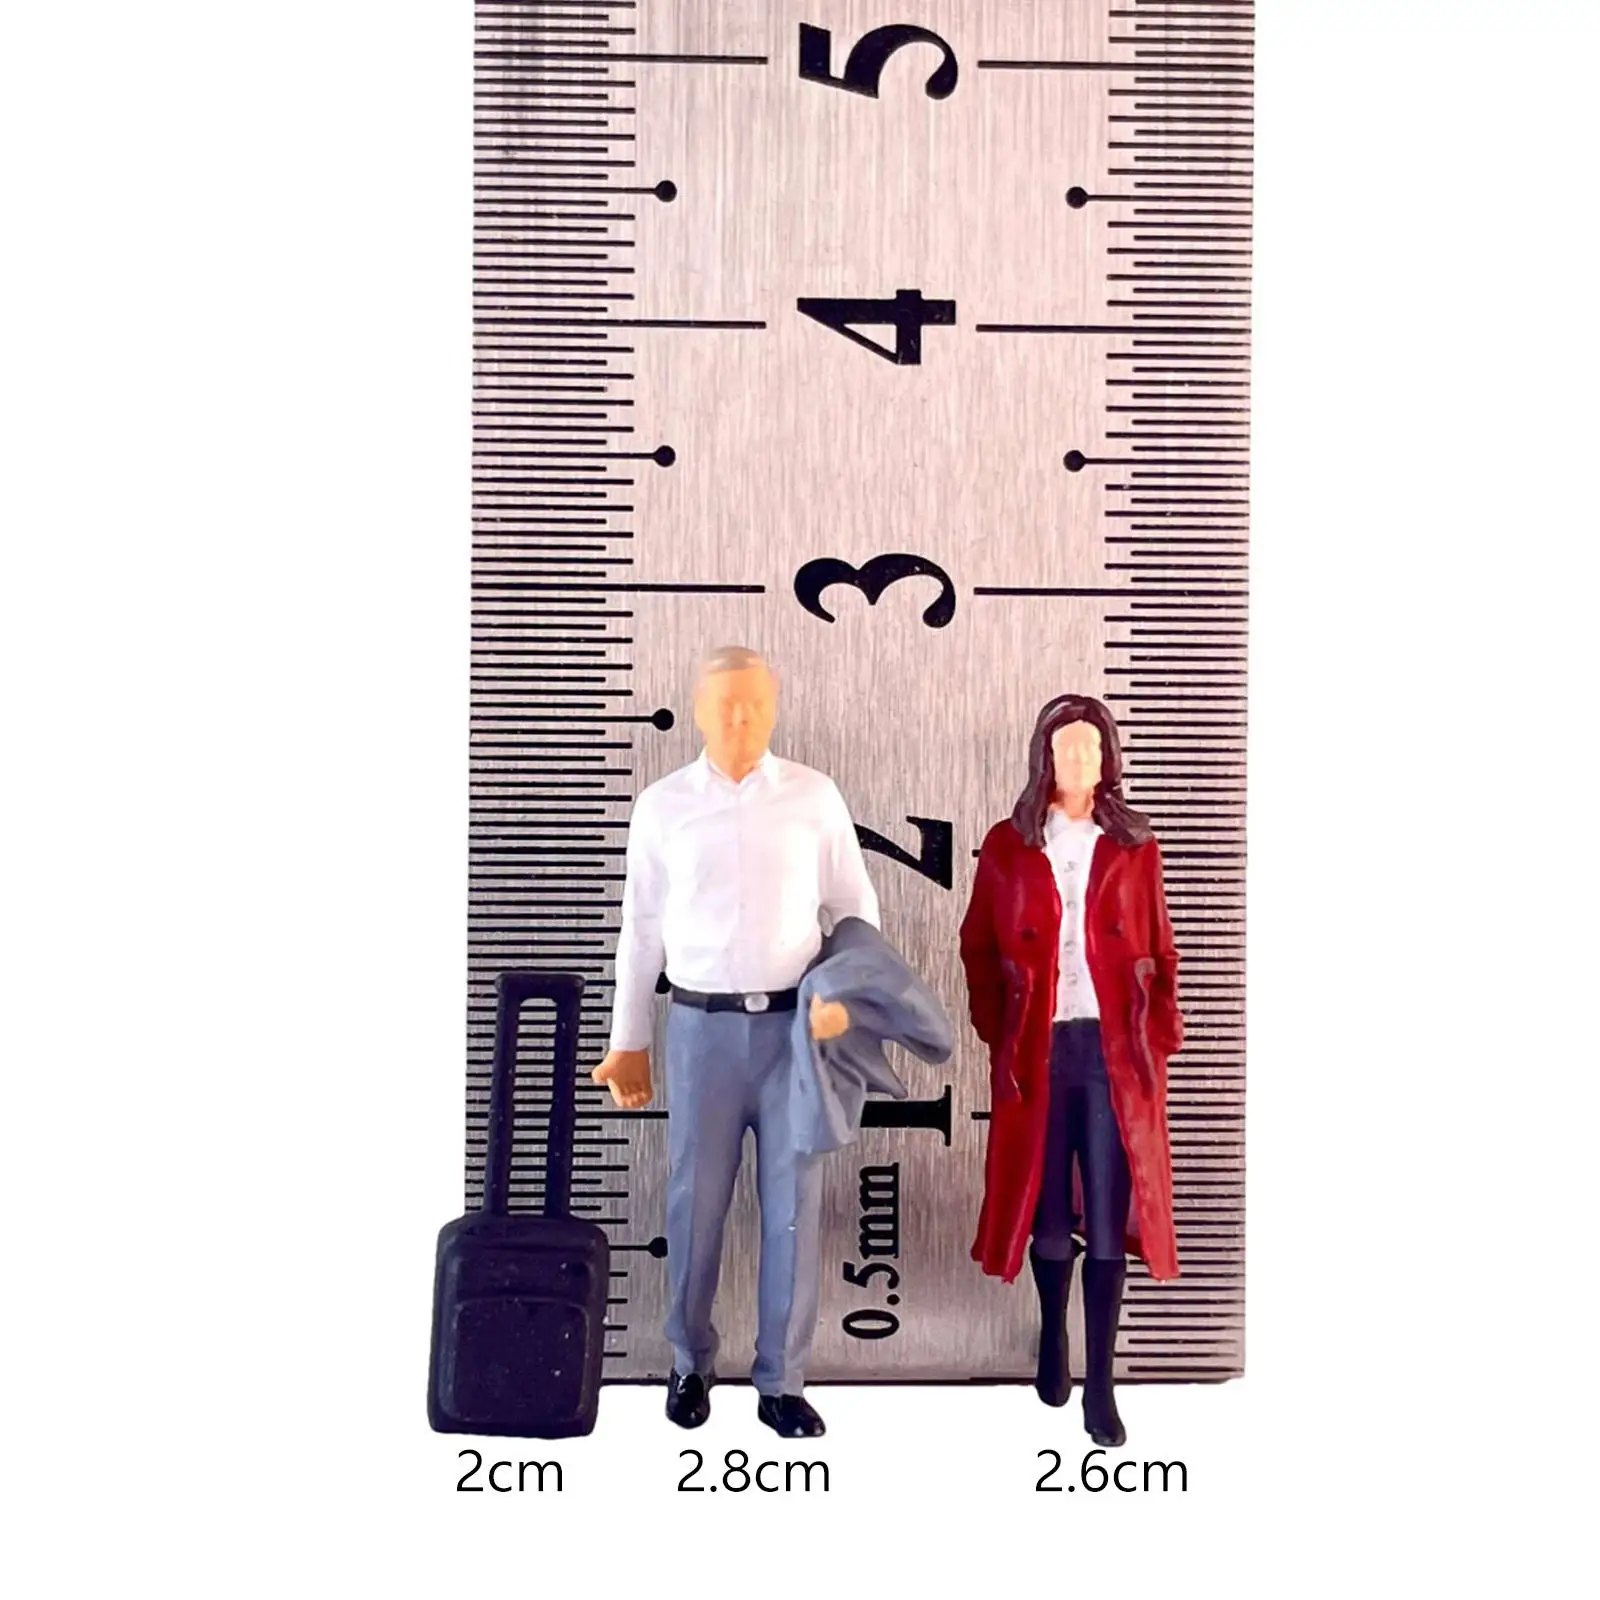 2Pcs 1:64 Scale Women and Men Figures with Suitcase Model S Gauge Collections Layout Decoration Resin Figurines Decoration